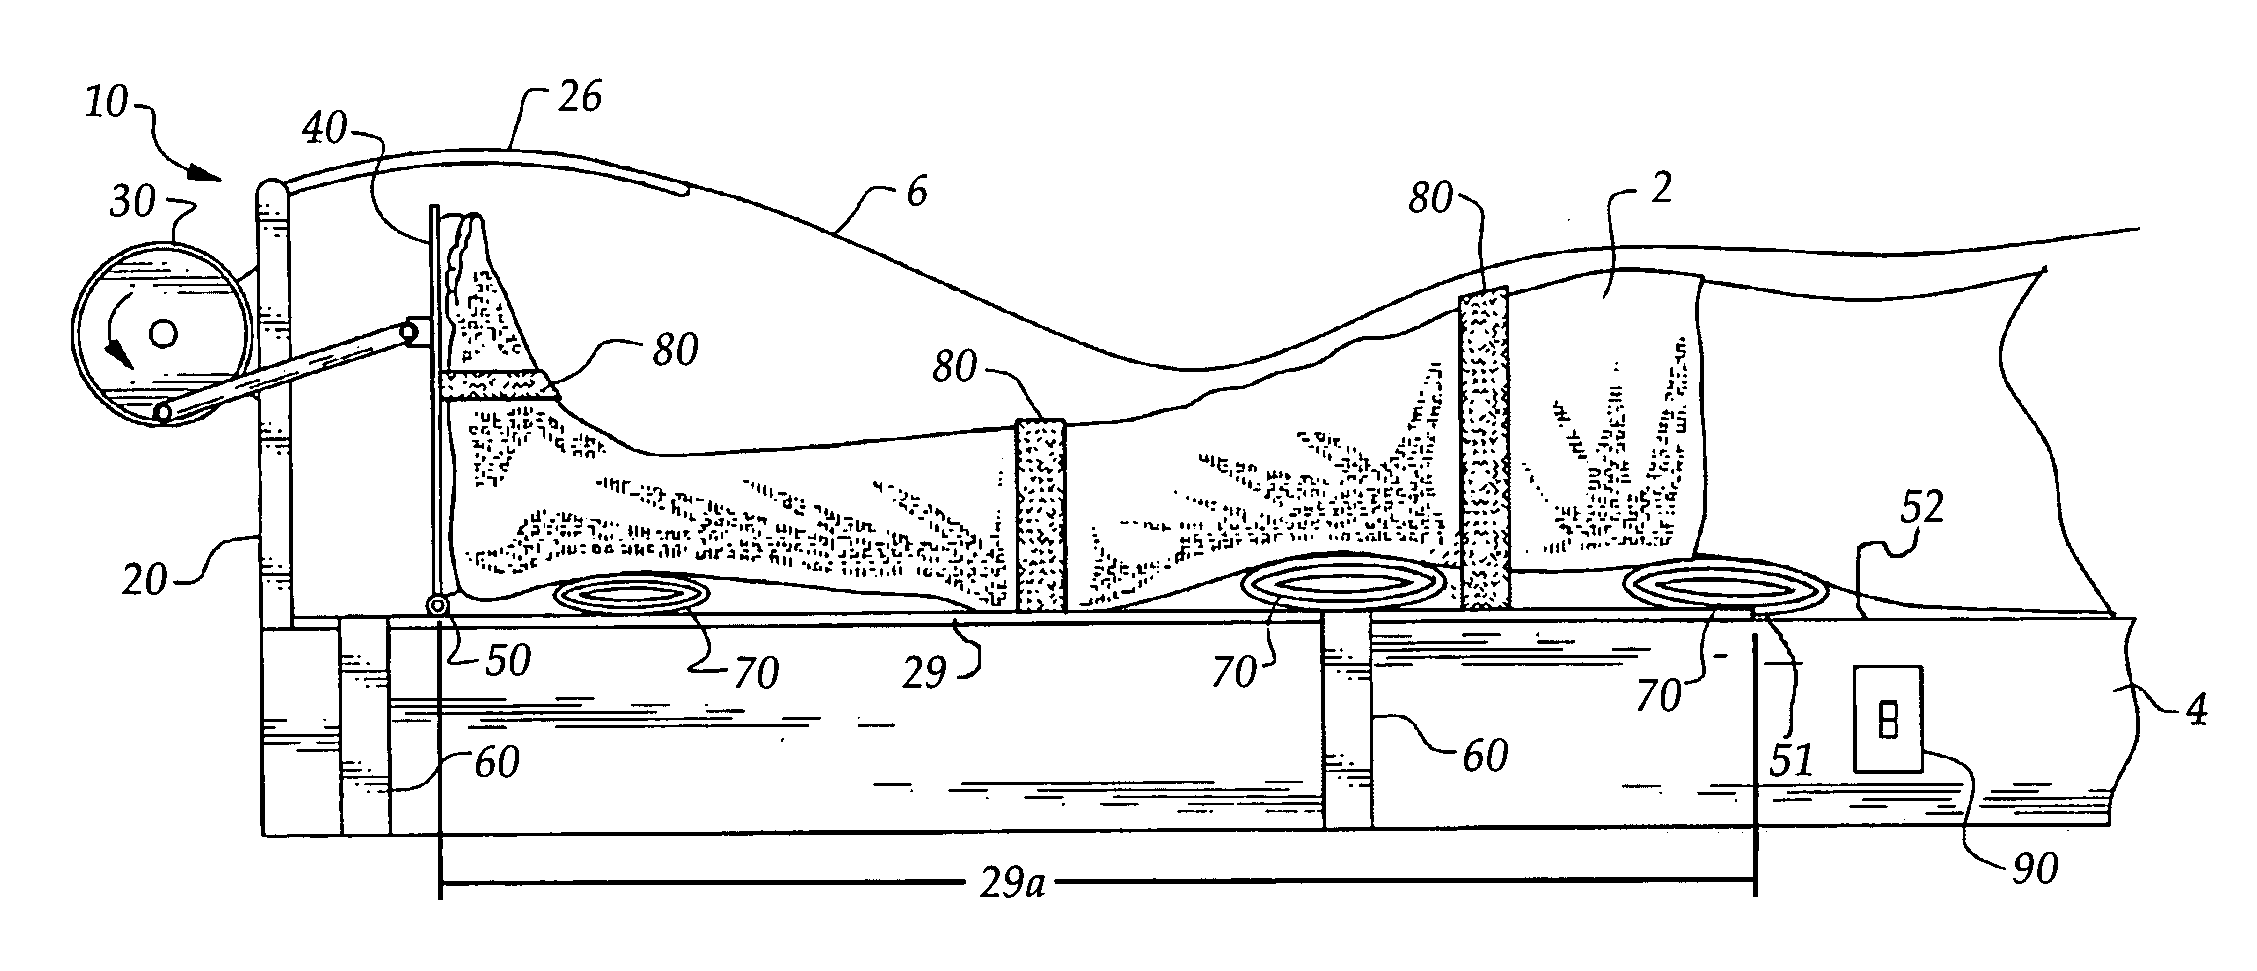 Lower extremity passive muscle manipulation device and method